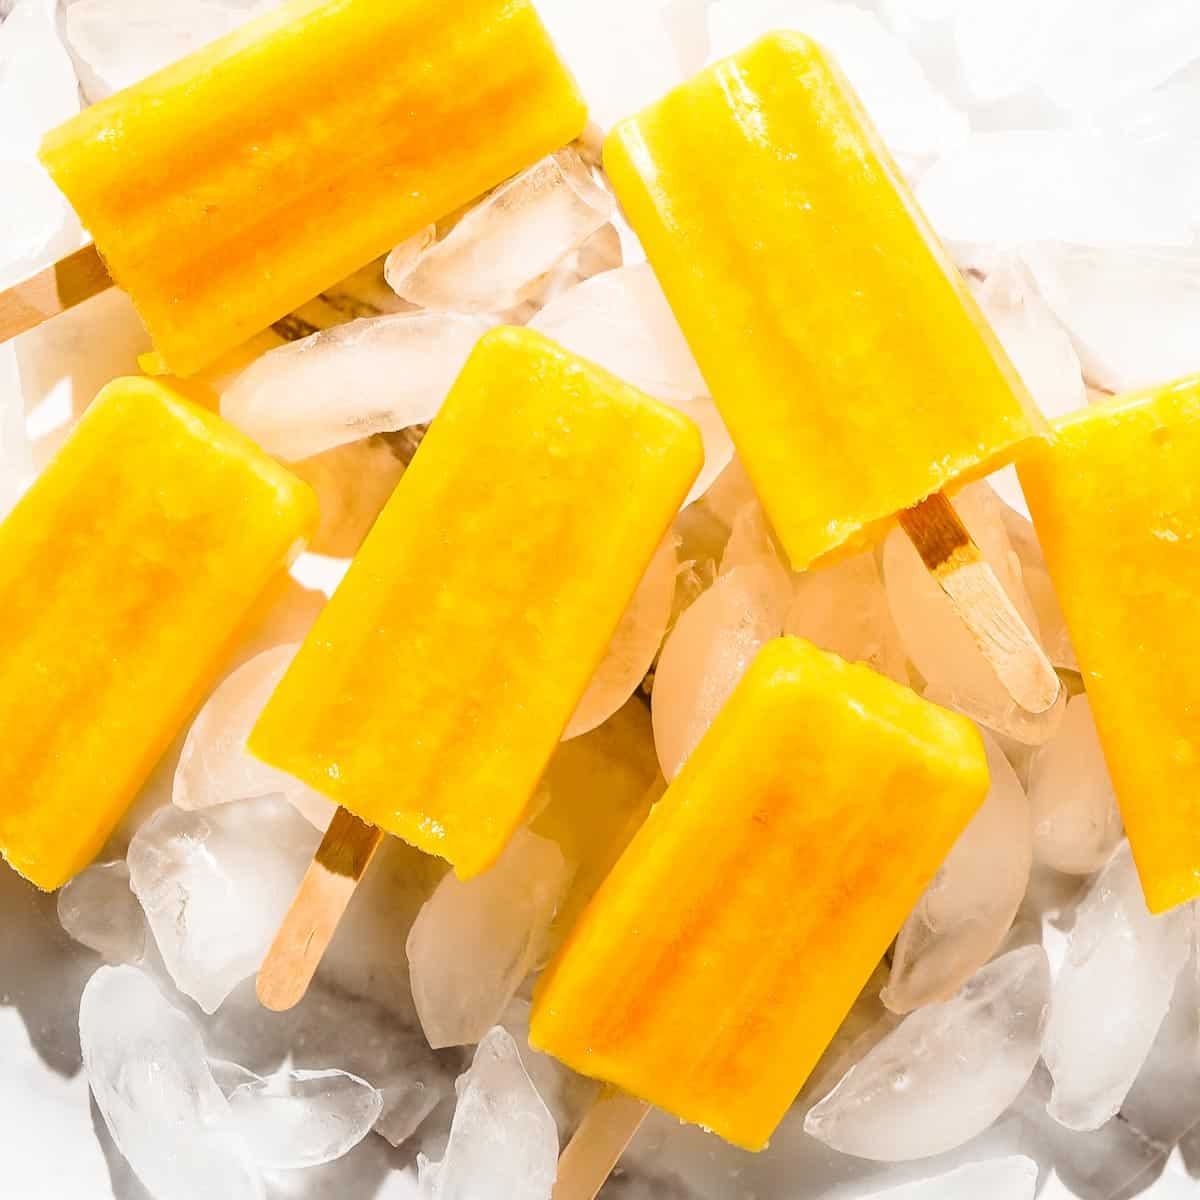 Mango Popsicles - Nibble and Dine